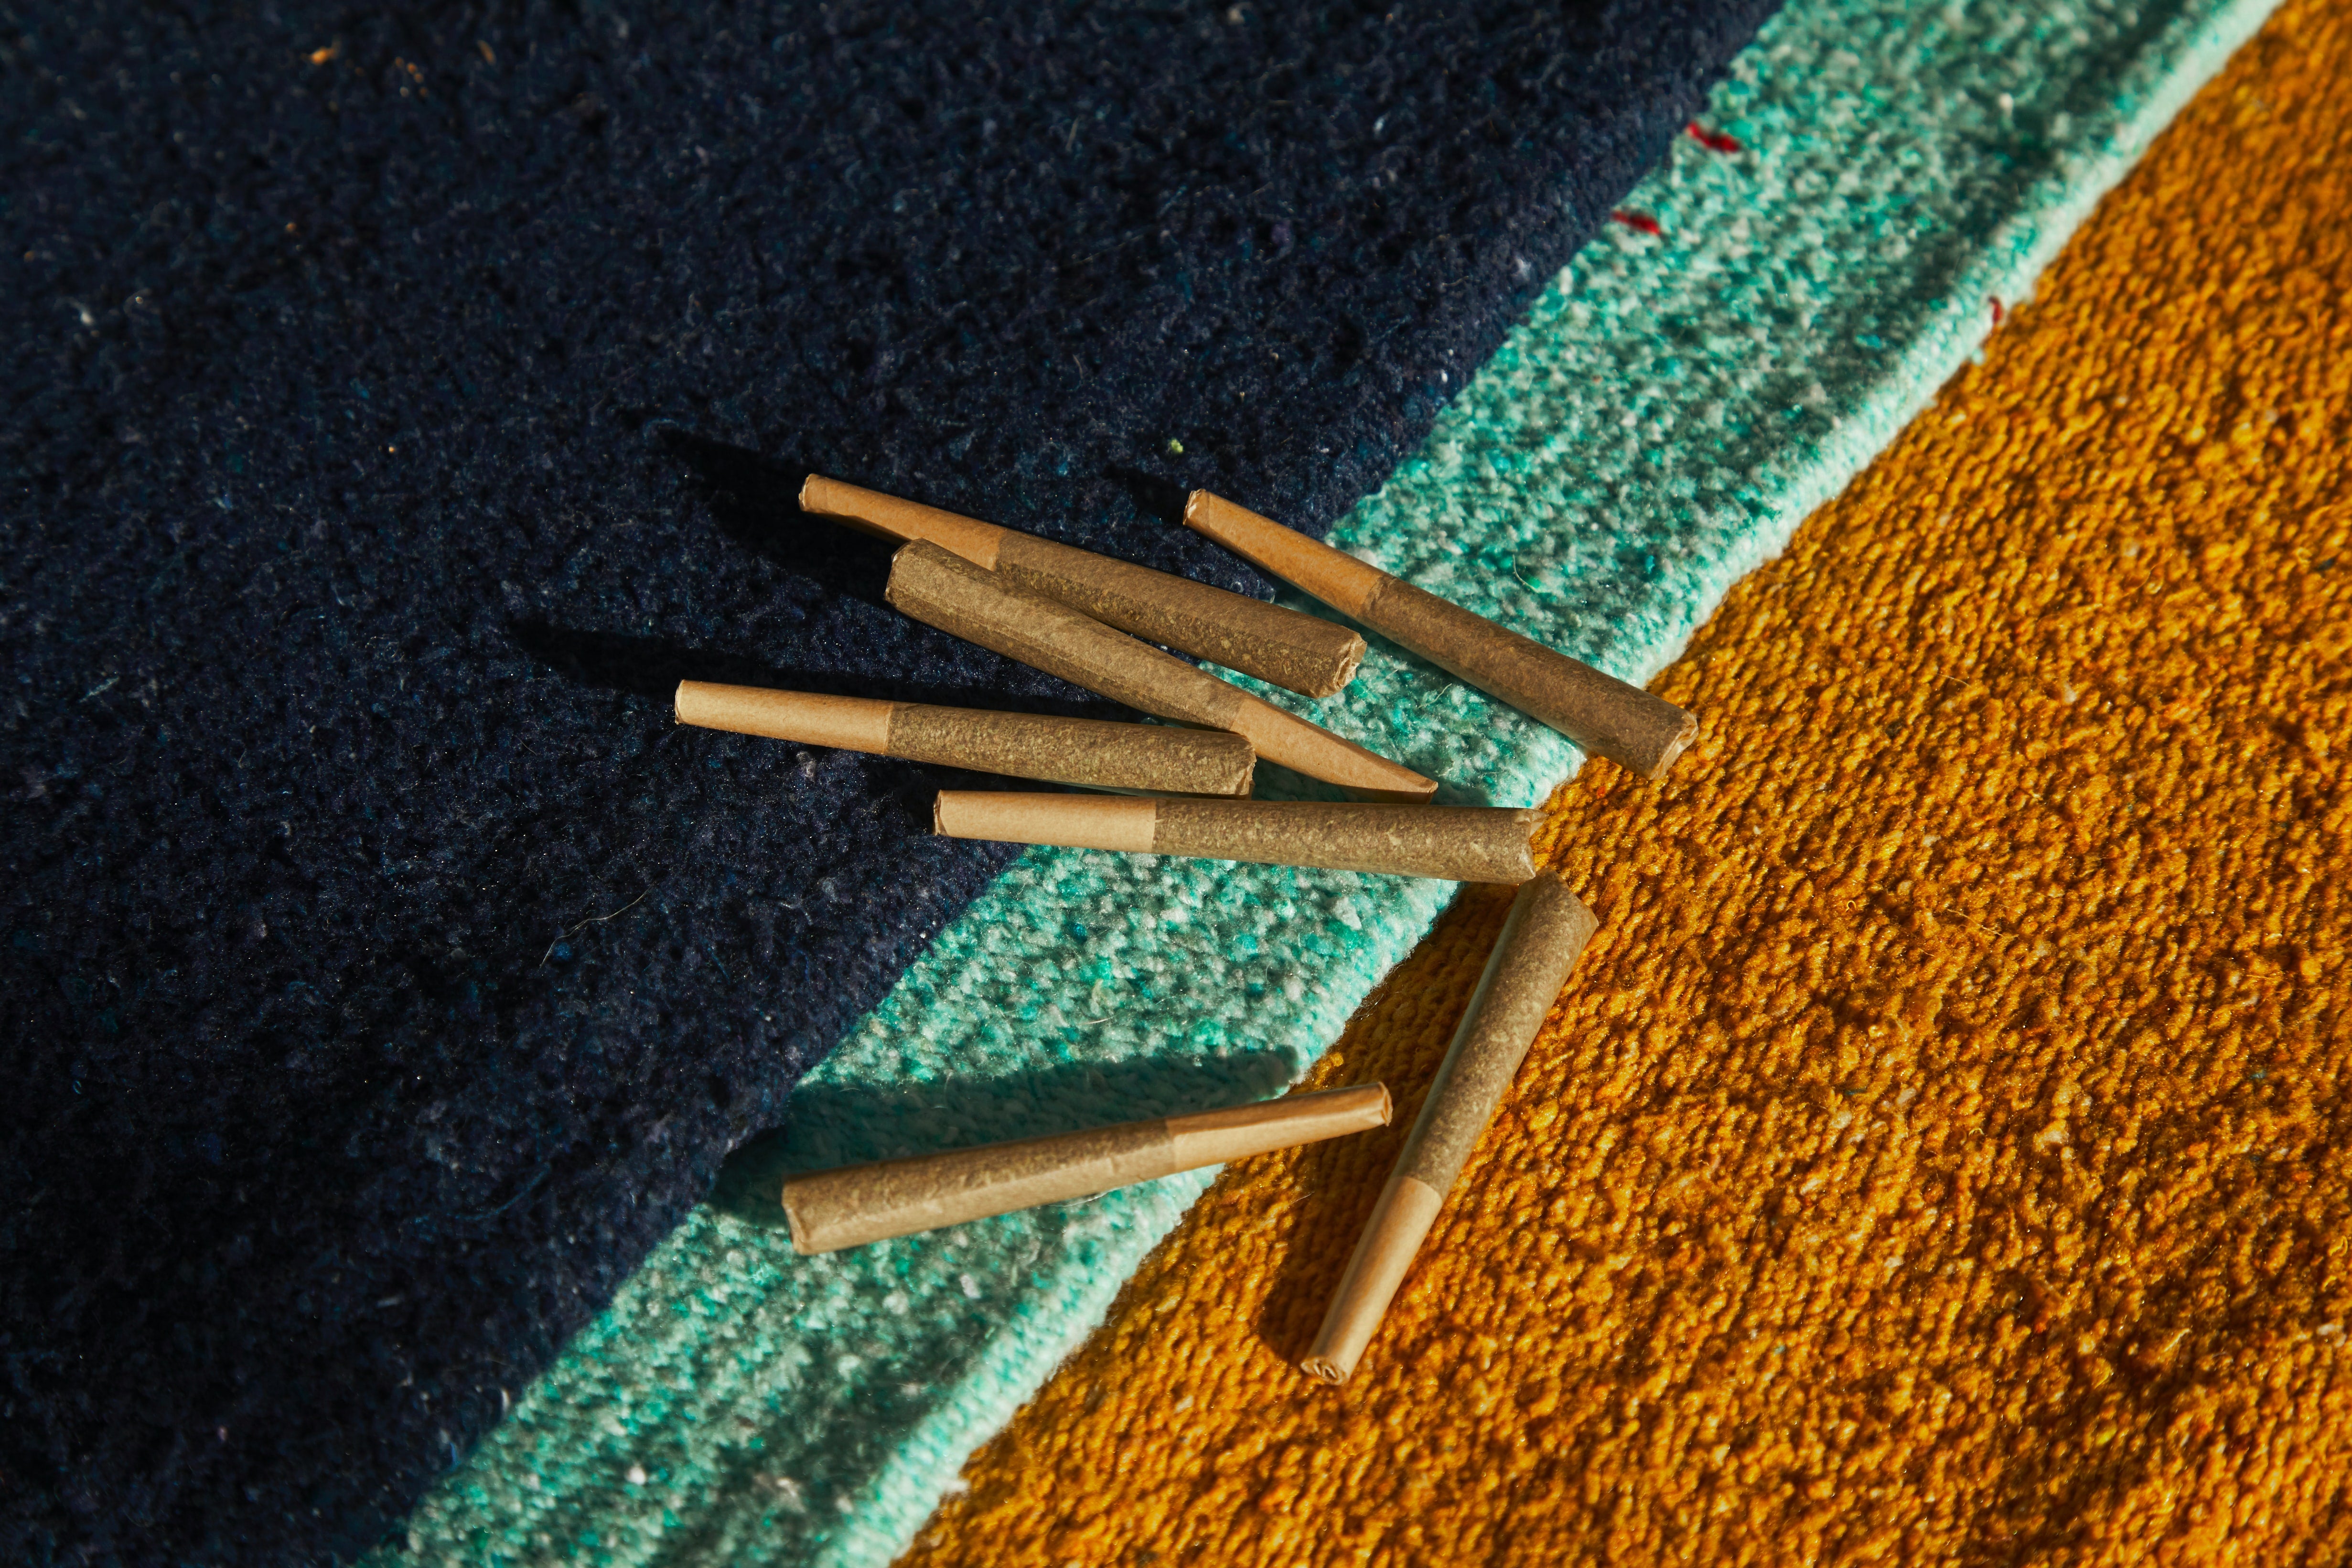 A cluster of infused pre-rolls are laid out on a beige, turquoise, and blue cloth.